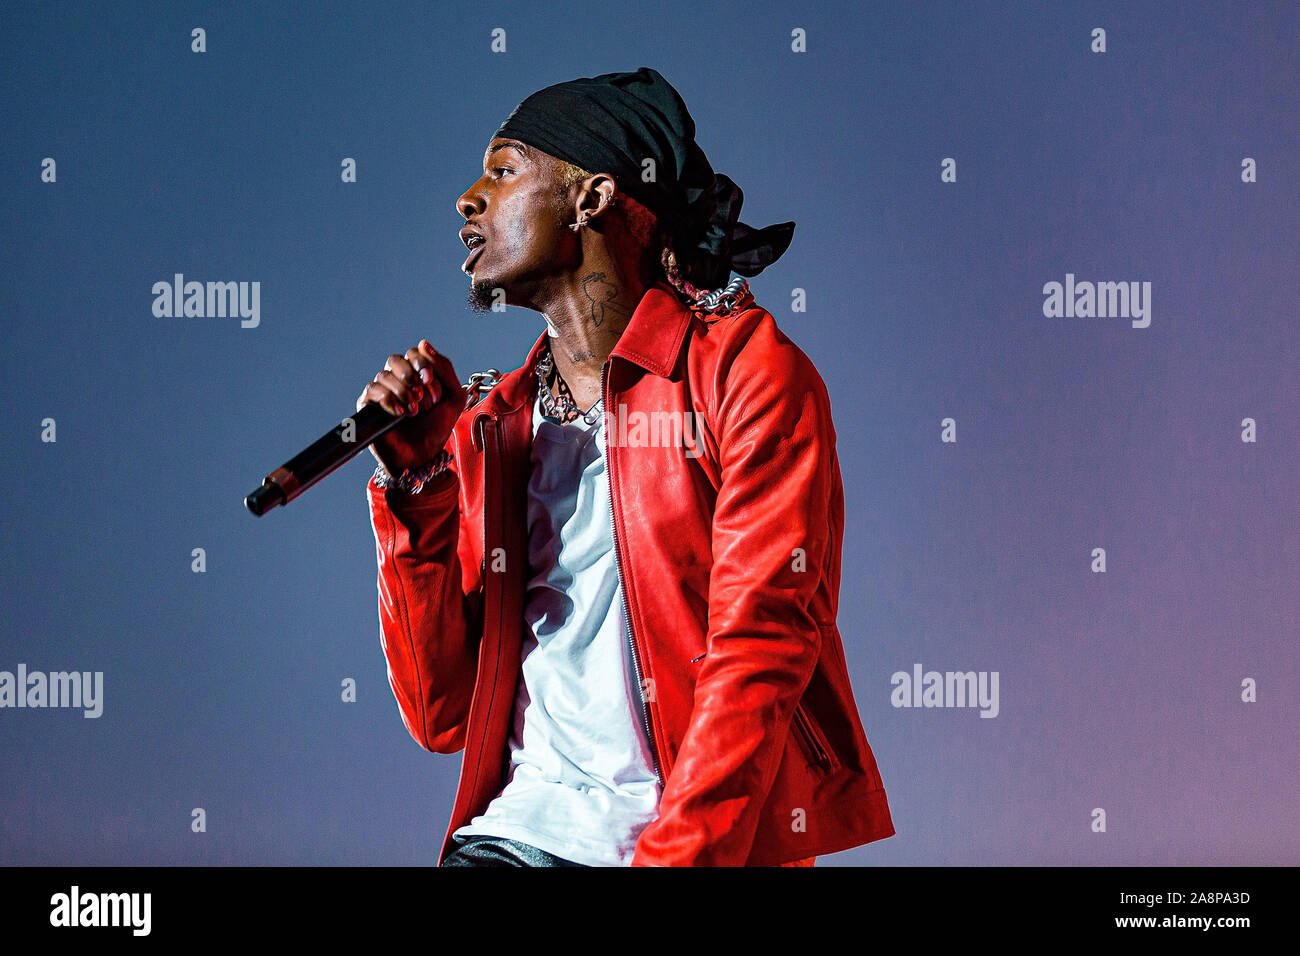 Texas, USA. 09th Nov, 2019. Playboi Carti performs during the second annual  Astroworld Festival at NRG Park on November 9, 2019 in Houston, Texas.  Credit: MediaPunch Inc/Alamy Live News Stock Photo - Alamy